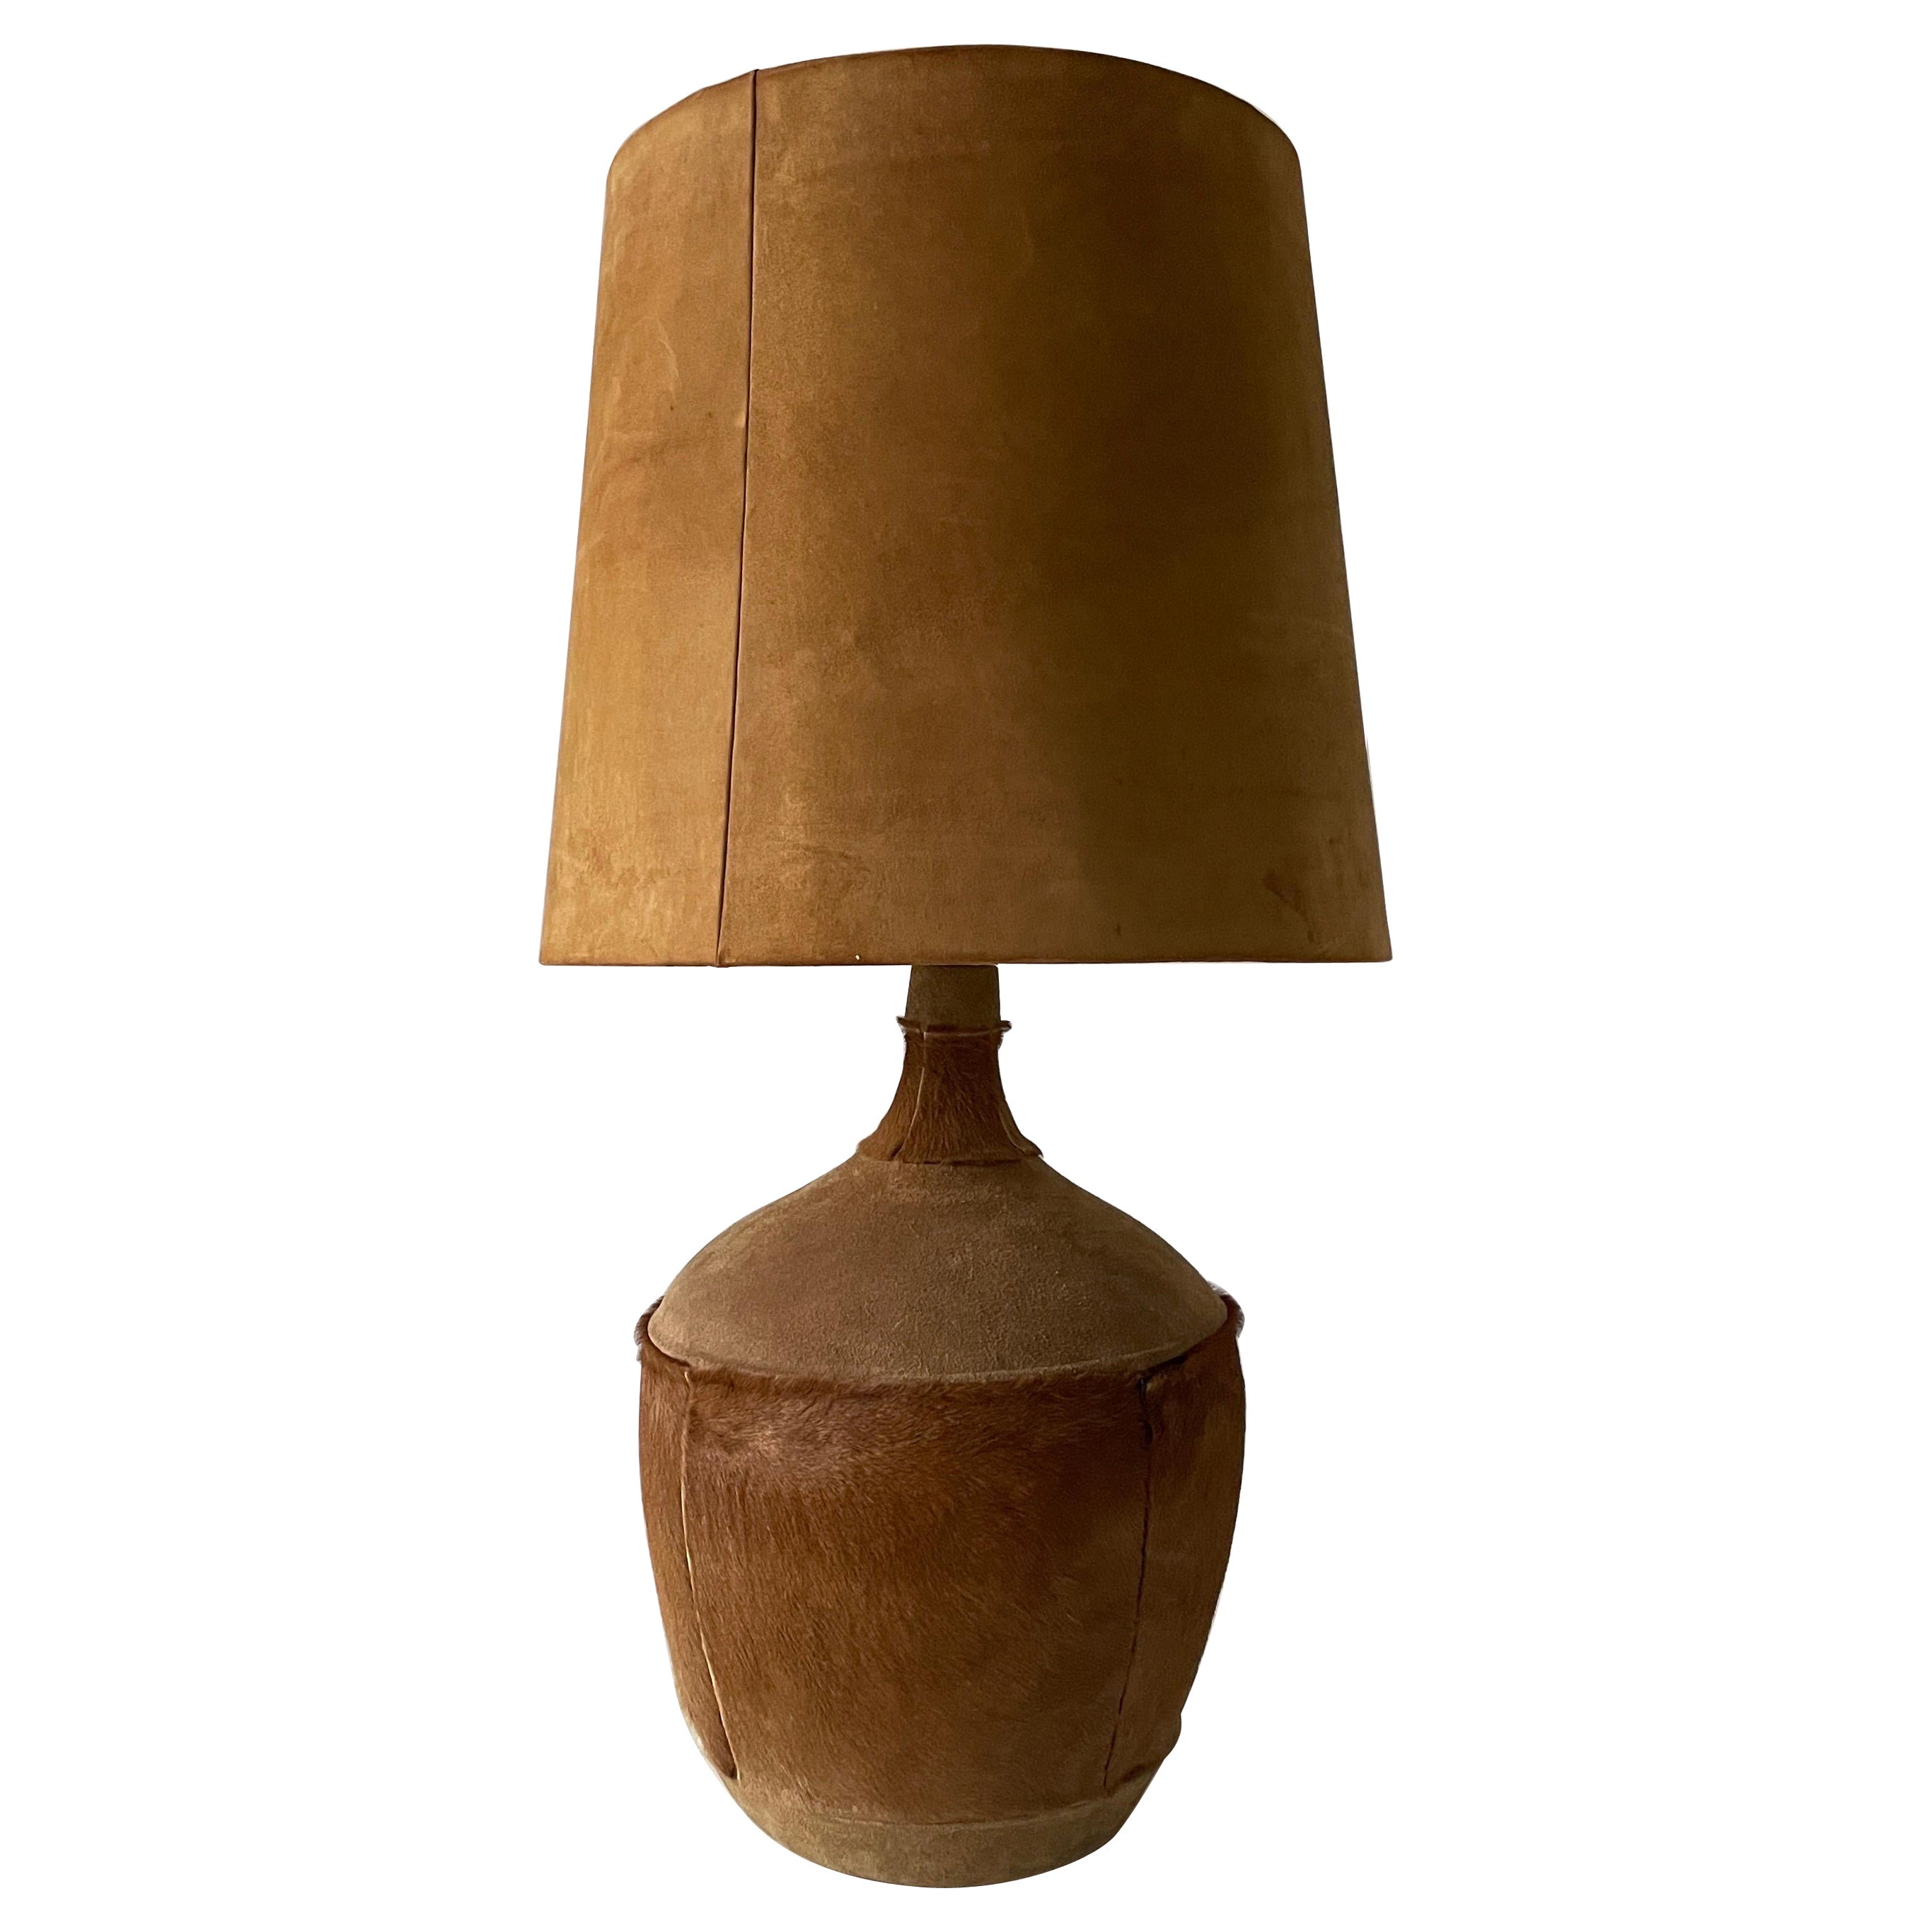 Tan Suede Leather and Glass Shade Floor or Table Lamp, 1960s, Denmark For Sale